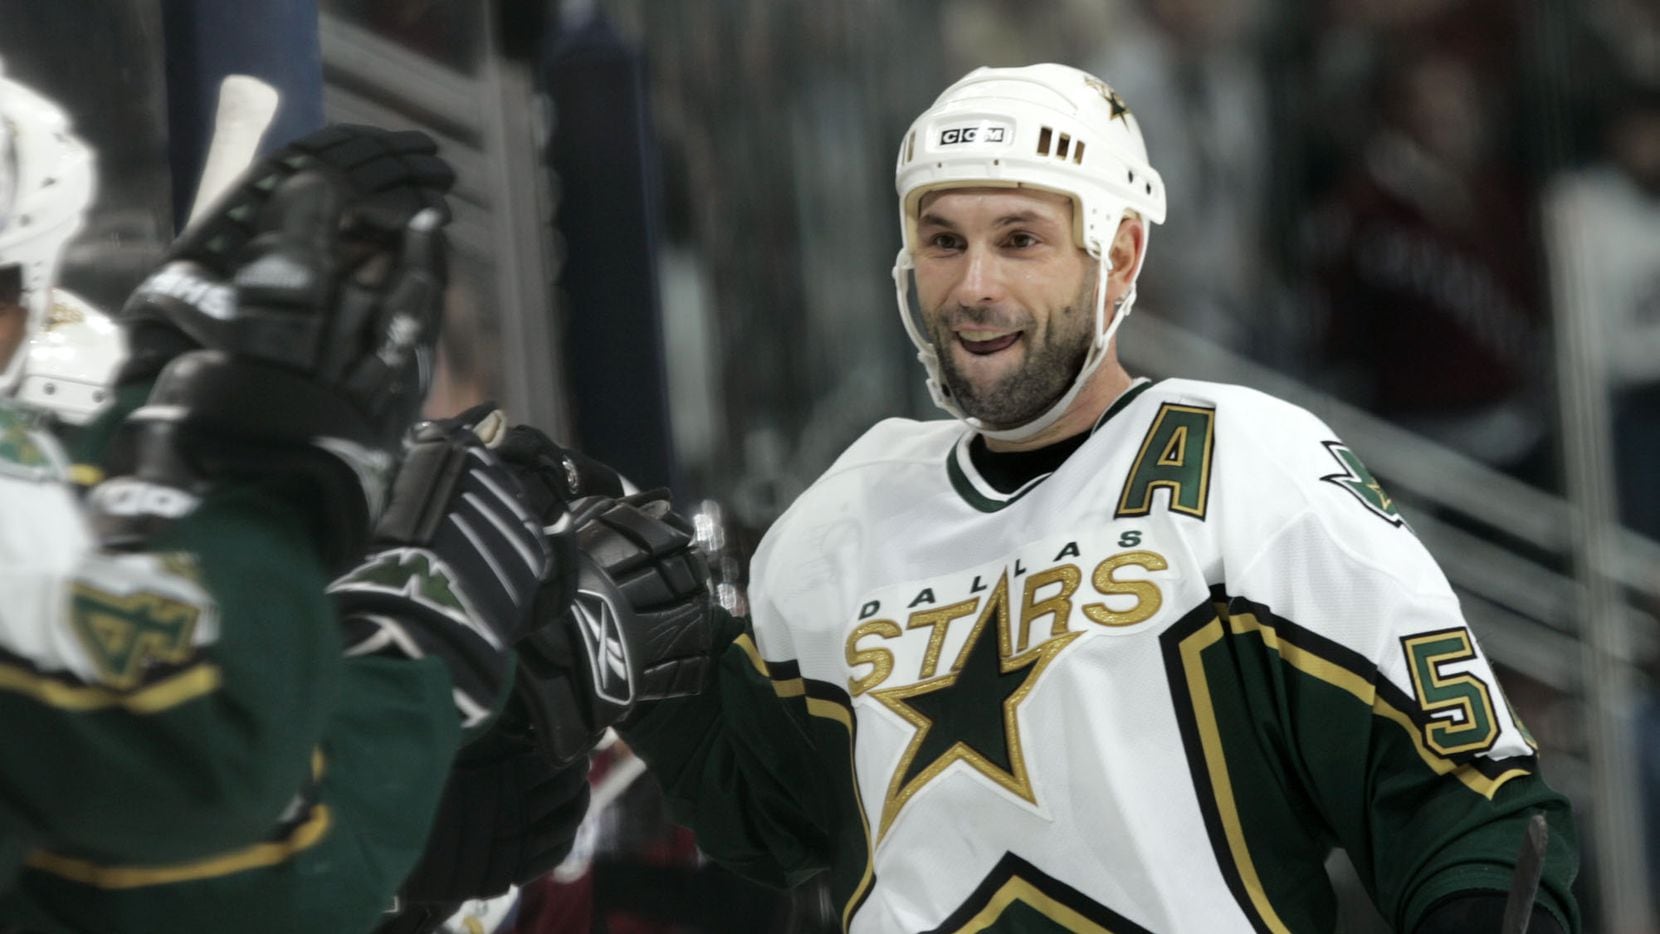 FILE - Dallas Stars defenseman Sergei Zubov of Russia celebrates with teammates after scoring a goal in the shootout in the Stars' 3-2 victory over the Colorado Avalanche in an NHL hockey game in Denver, Thursday, jan. 26, 2006. (AP Photo/David Zalubowski)